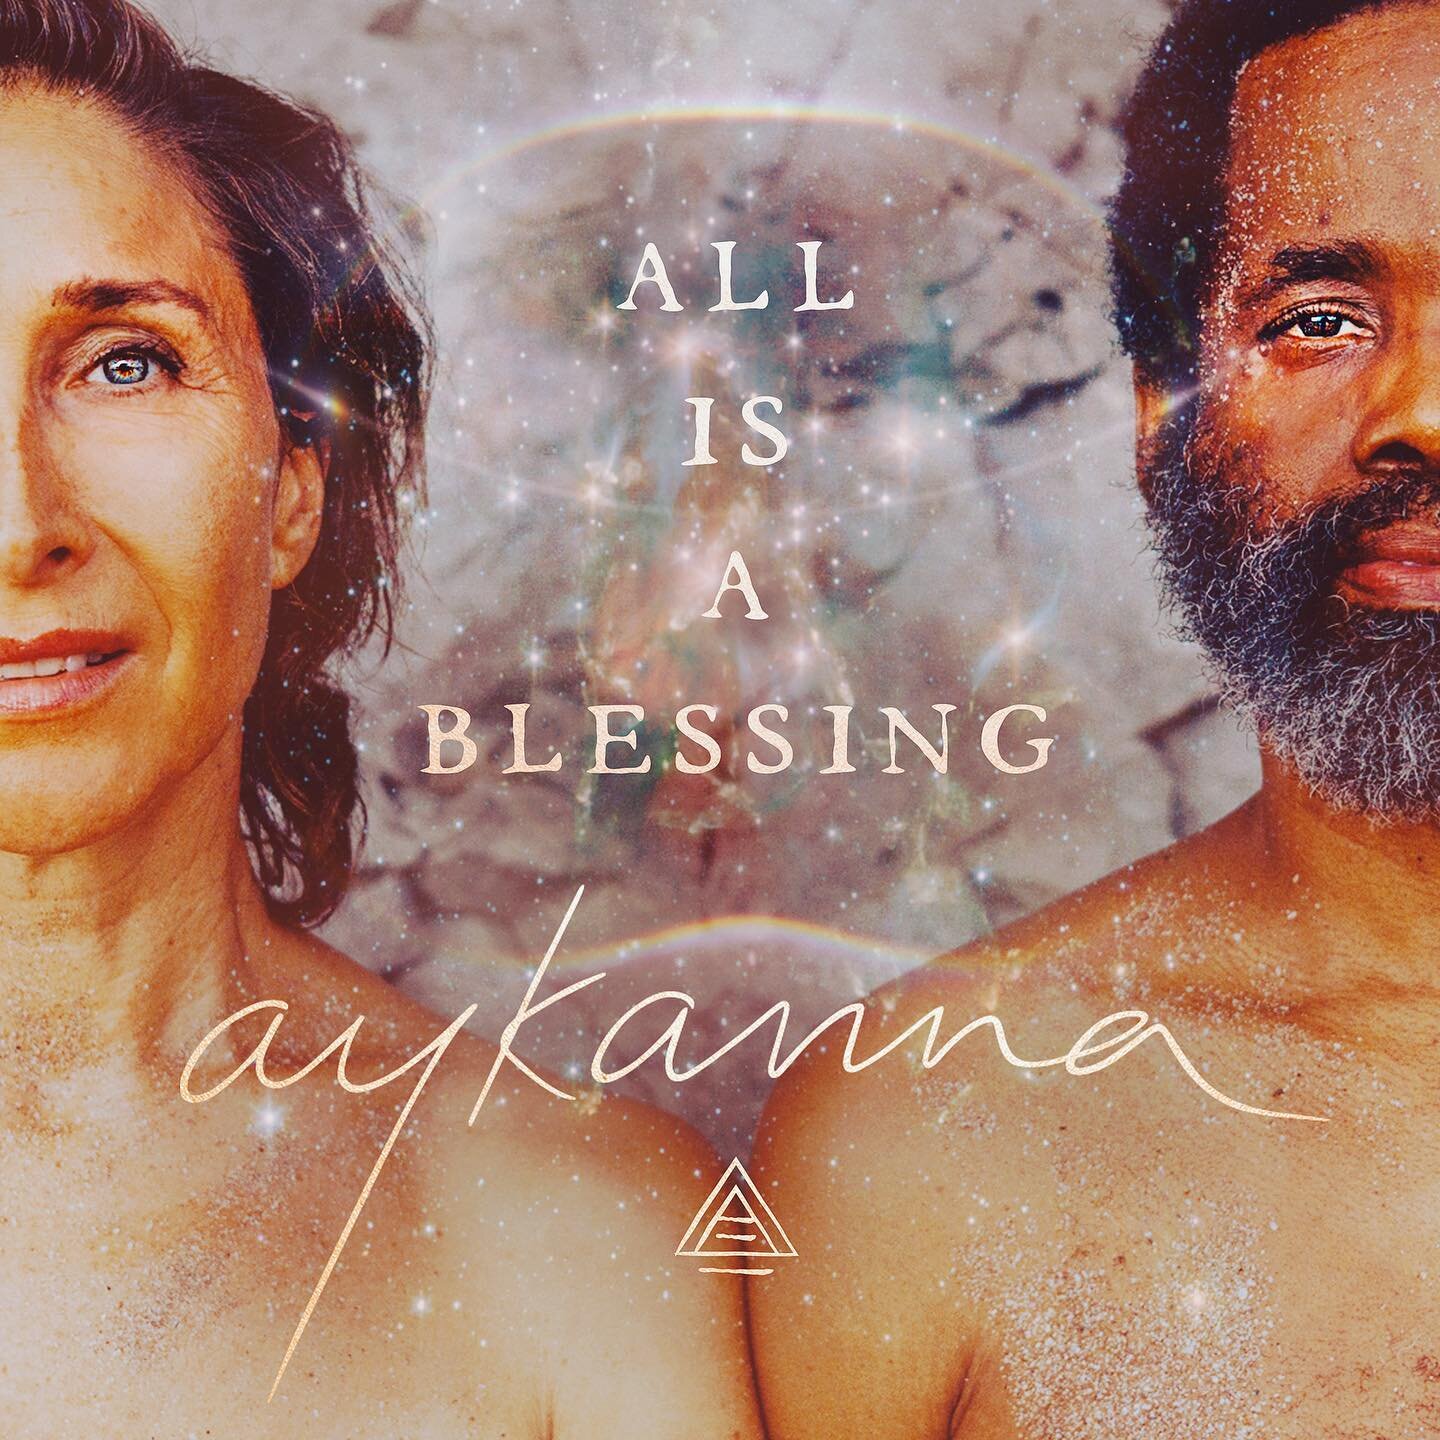 OUT TODAY! All Is A Blessing has been a gift in our lives as we&rsquo;ve been unwinding for the last few years. 

As we all have. 

Unwinding untruths, disconnection and separation. 

We all have our stories,  our traumas, our troubles, but inside al